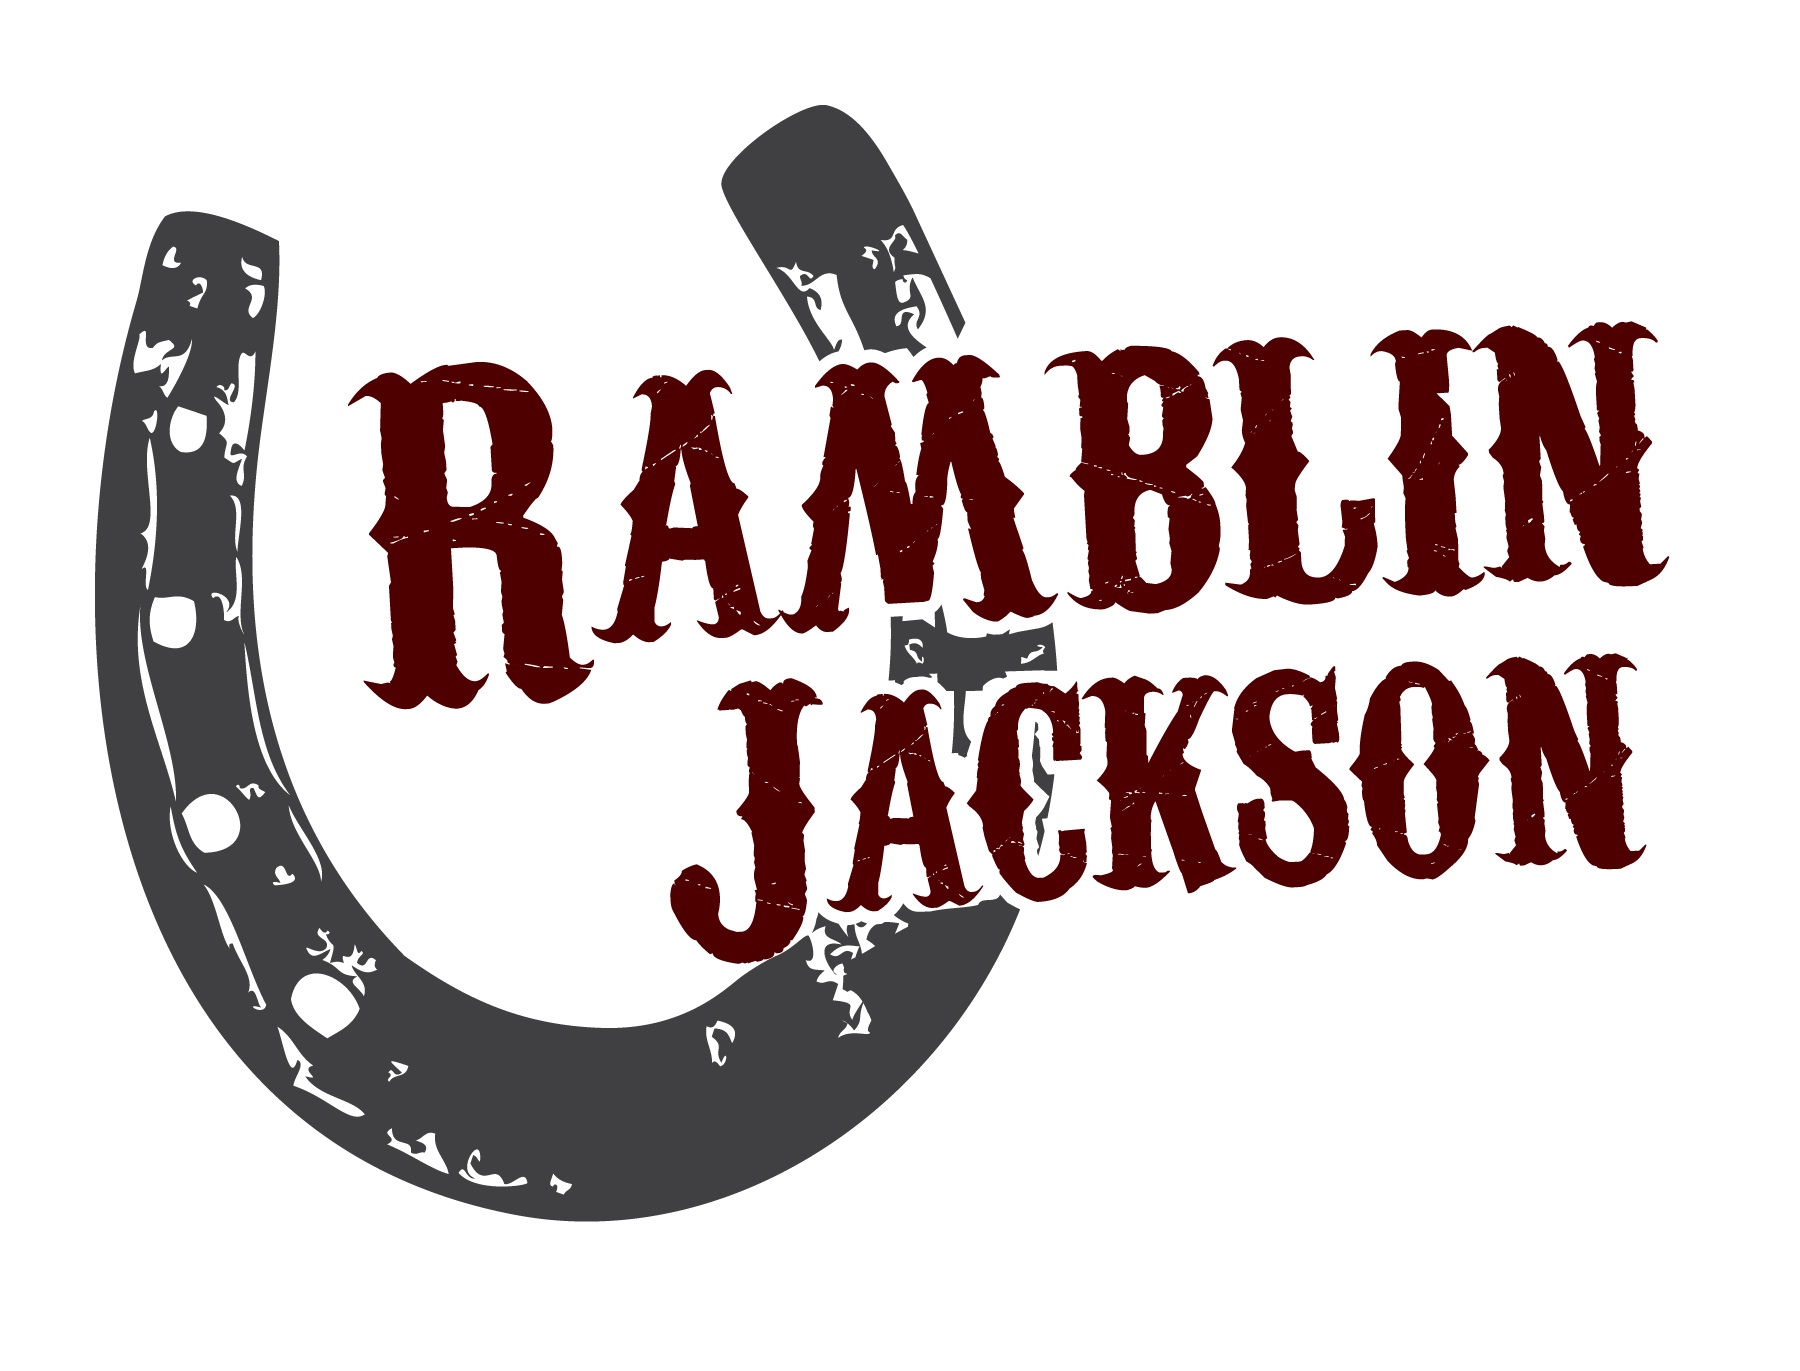 Ramblin Jackson is a digital marketing + video production agency focused on growing local businesses throughout the United States with social media, search engine optimization, website design, & more.